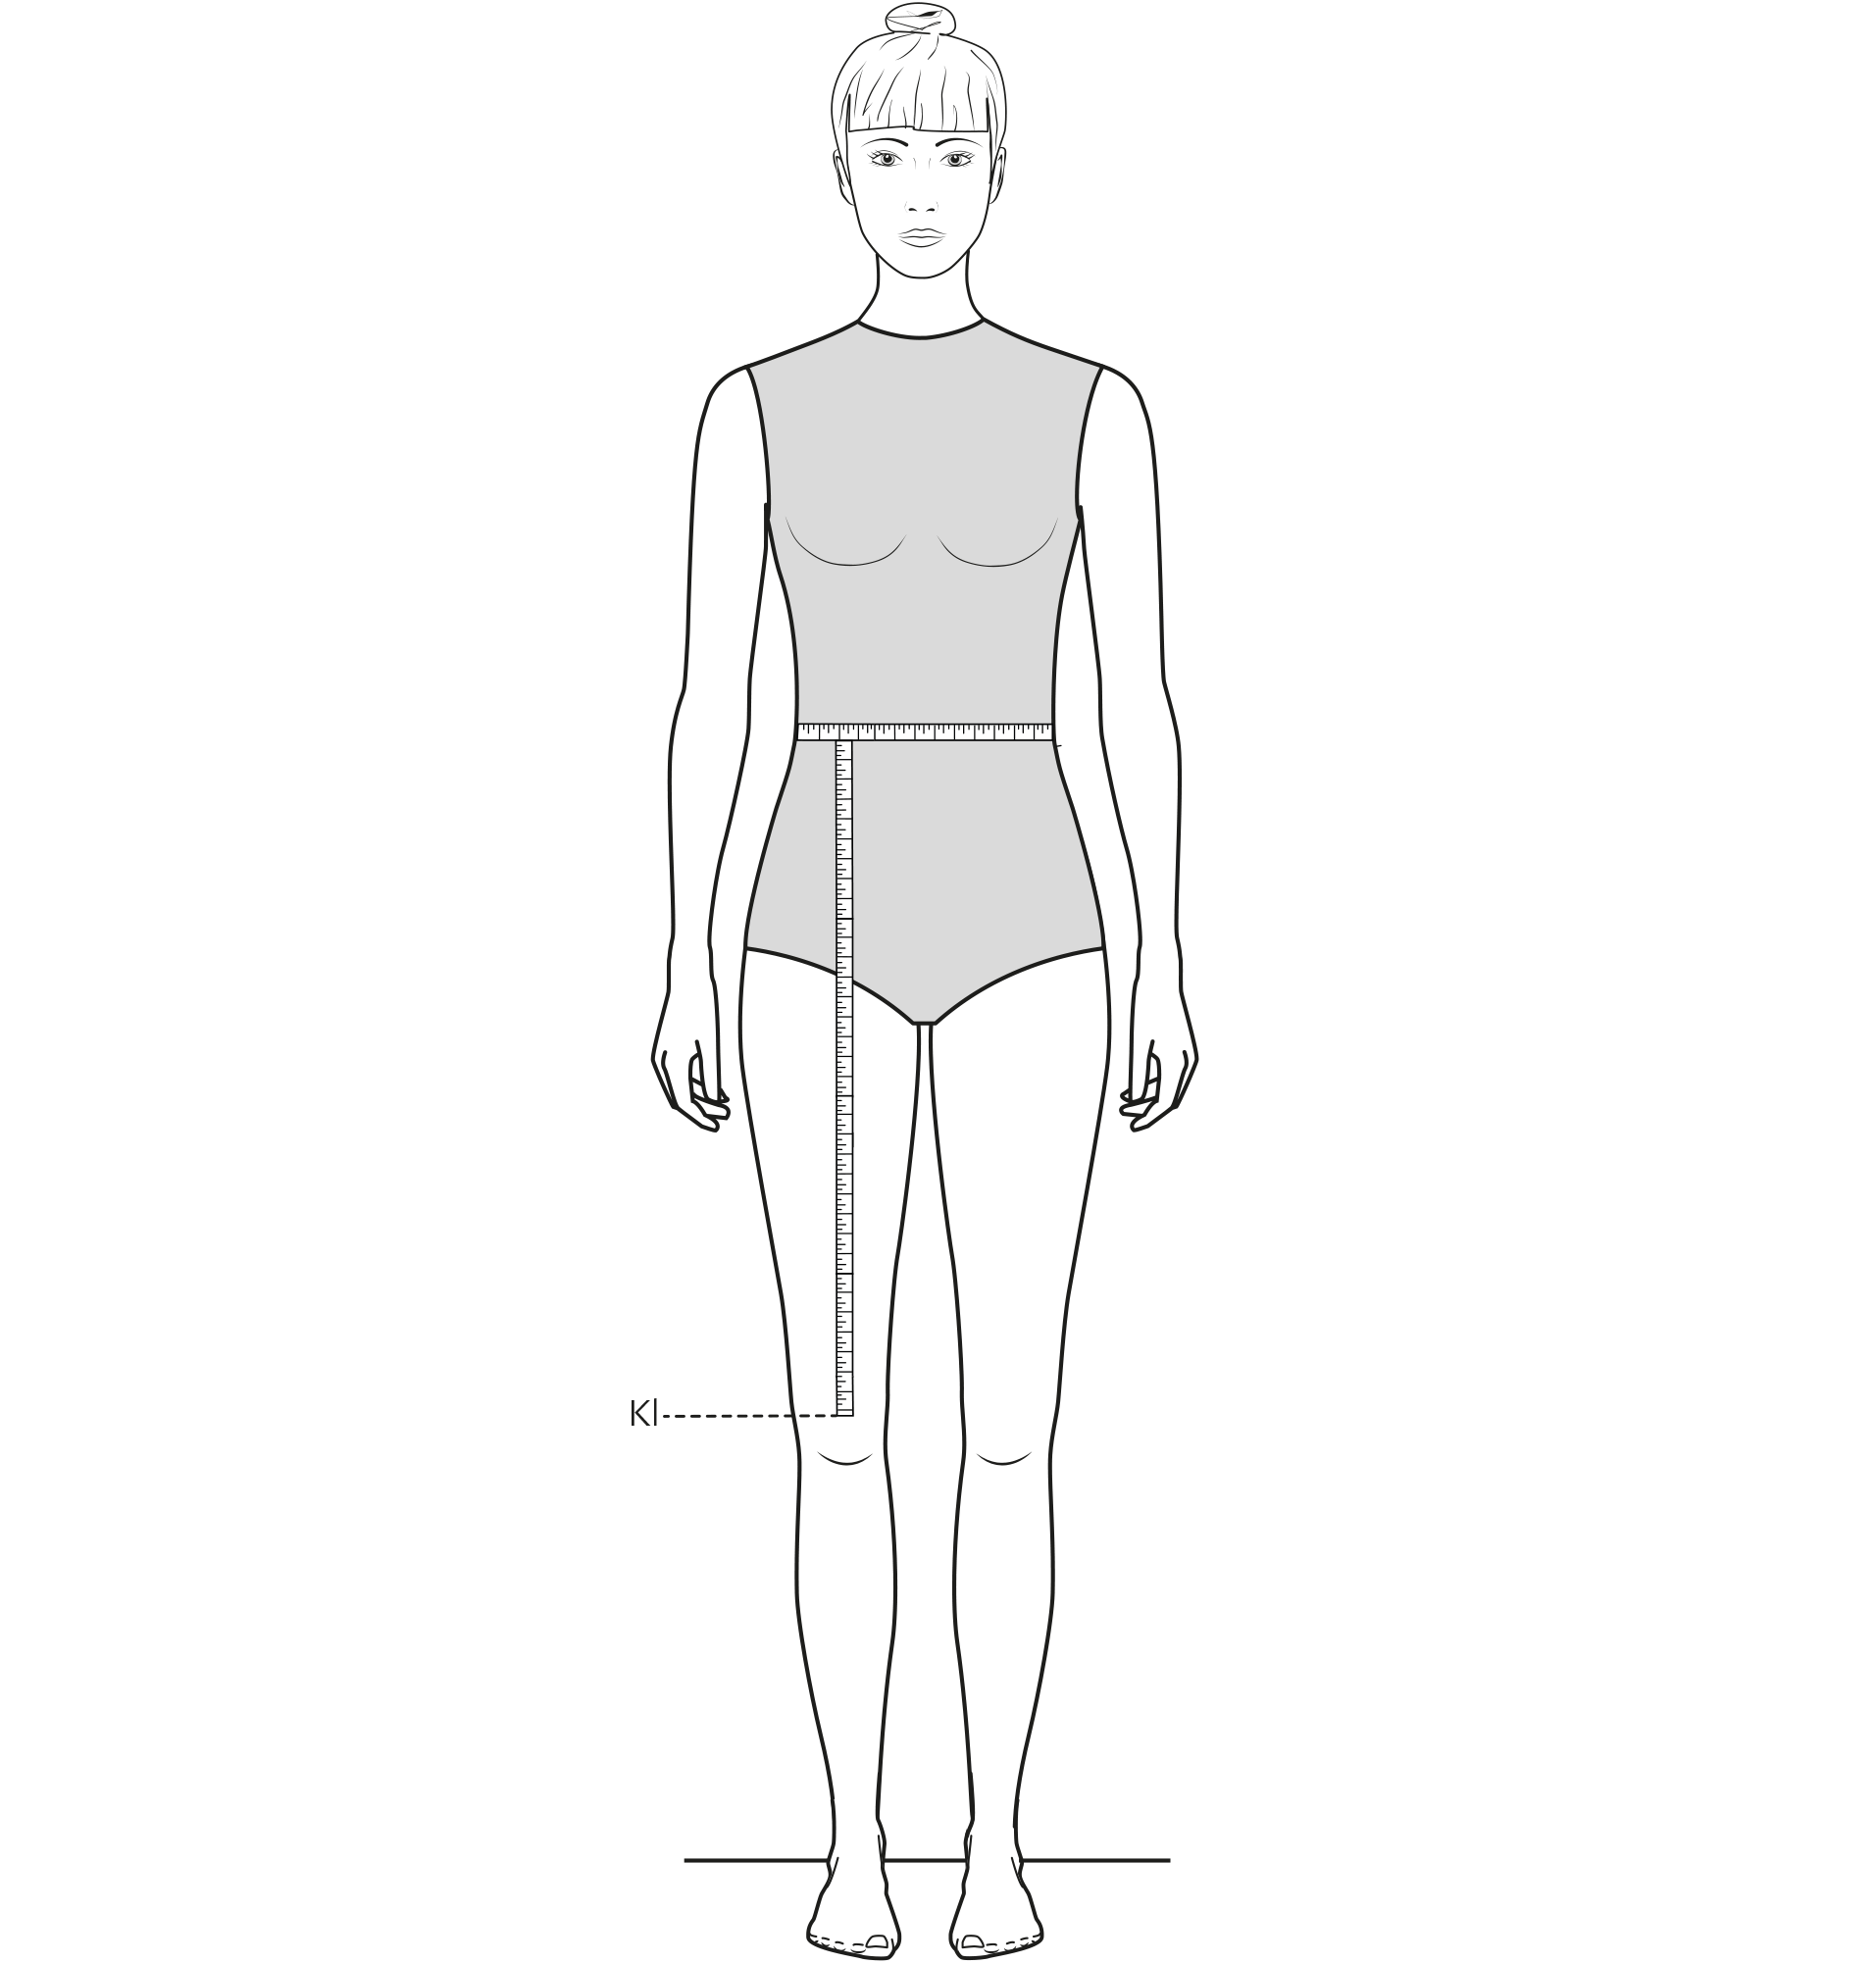 This figure shows the measurement of the Knee length.